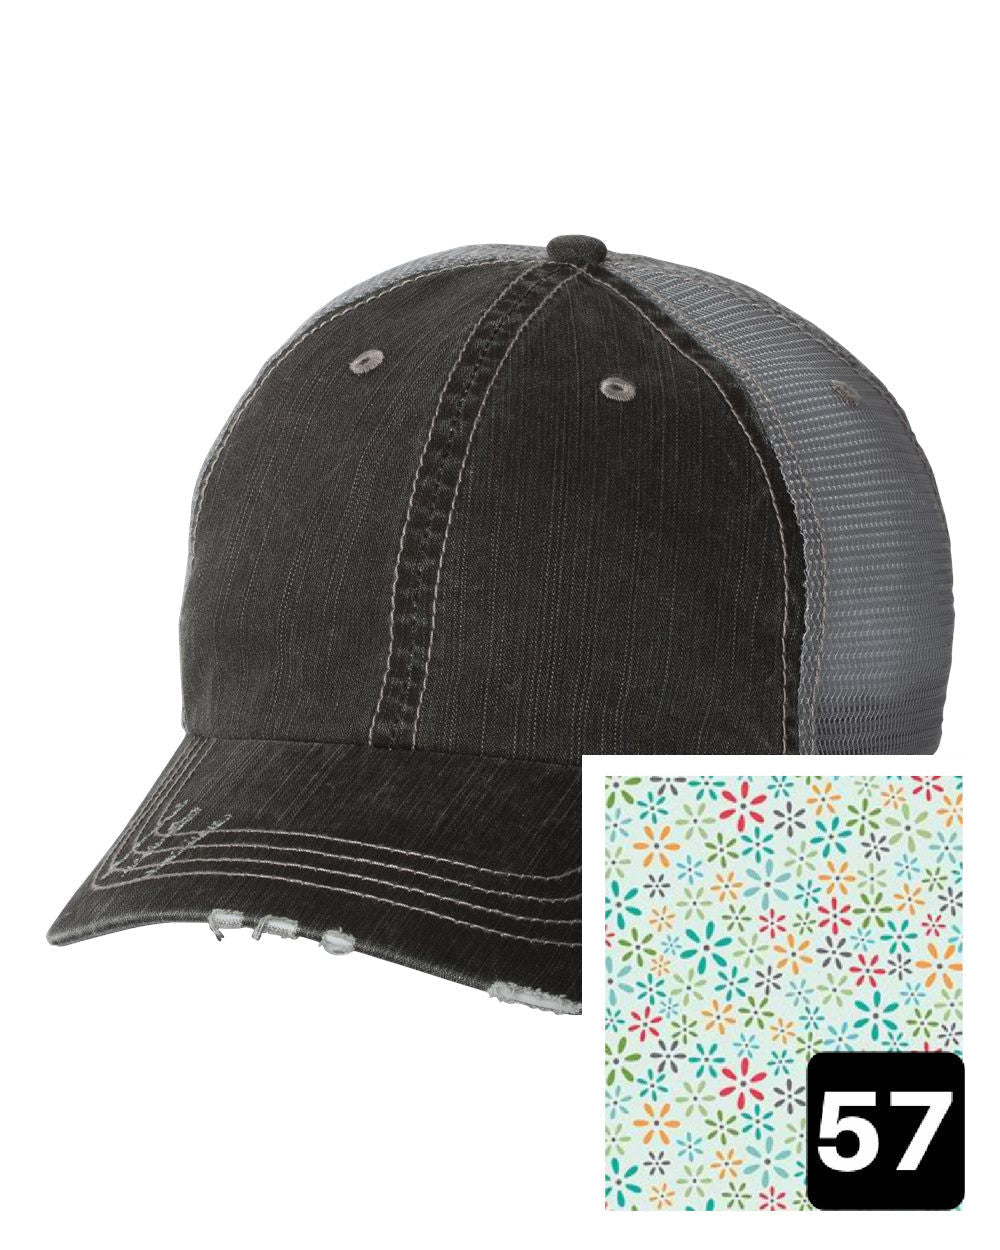 gray distressed trucker hat with white daisy on yellow fabric state of Hawaii